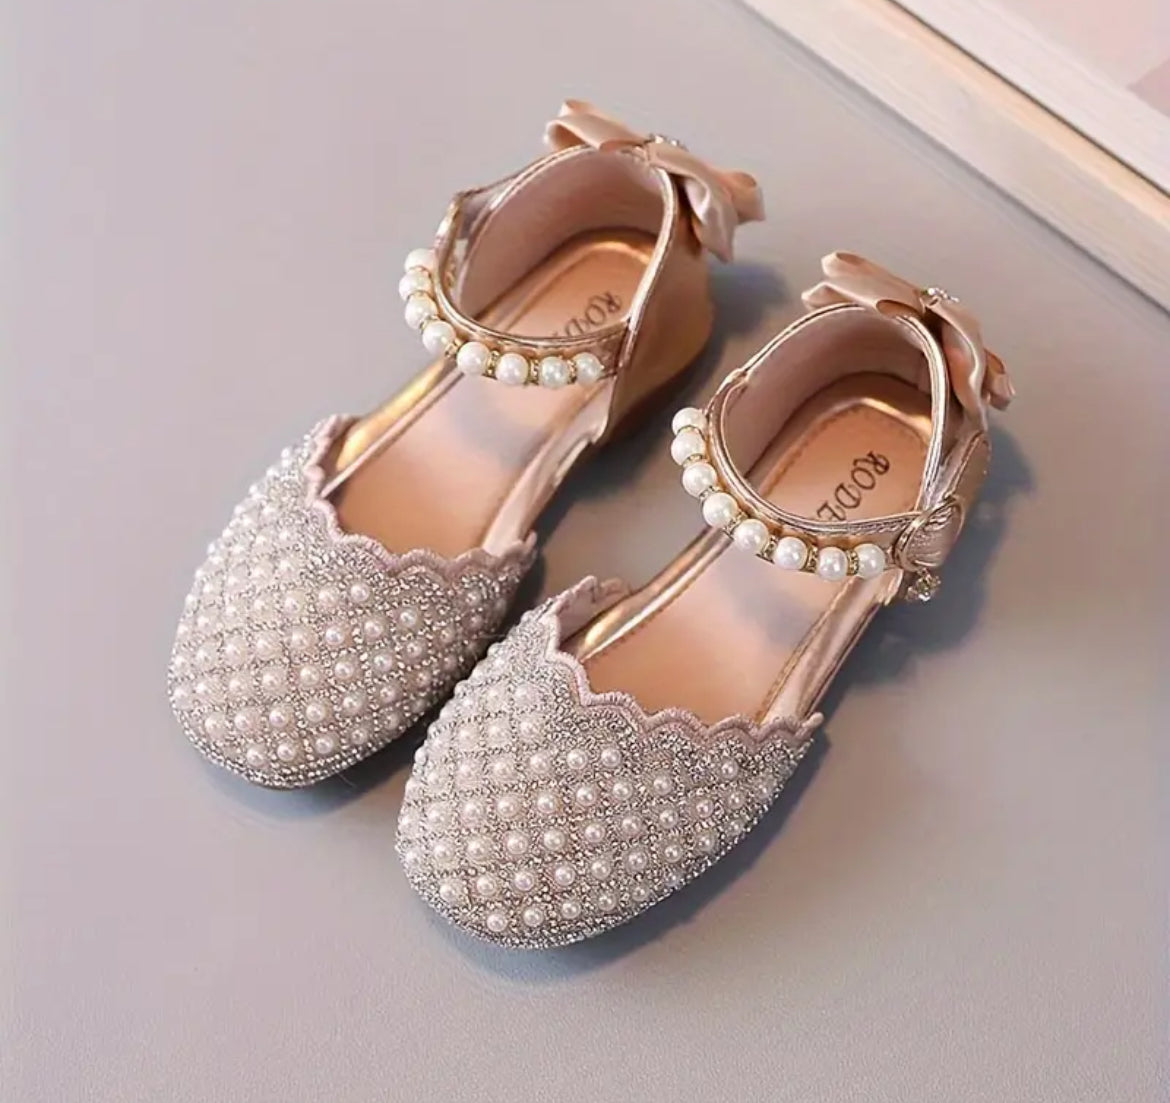 Glam ✨ Babies Collection, Girl's Low Heel, Bowknots Pears & Rhinestones